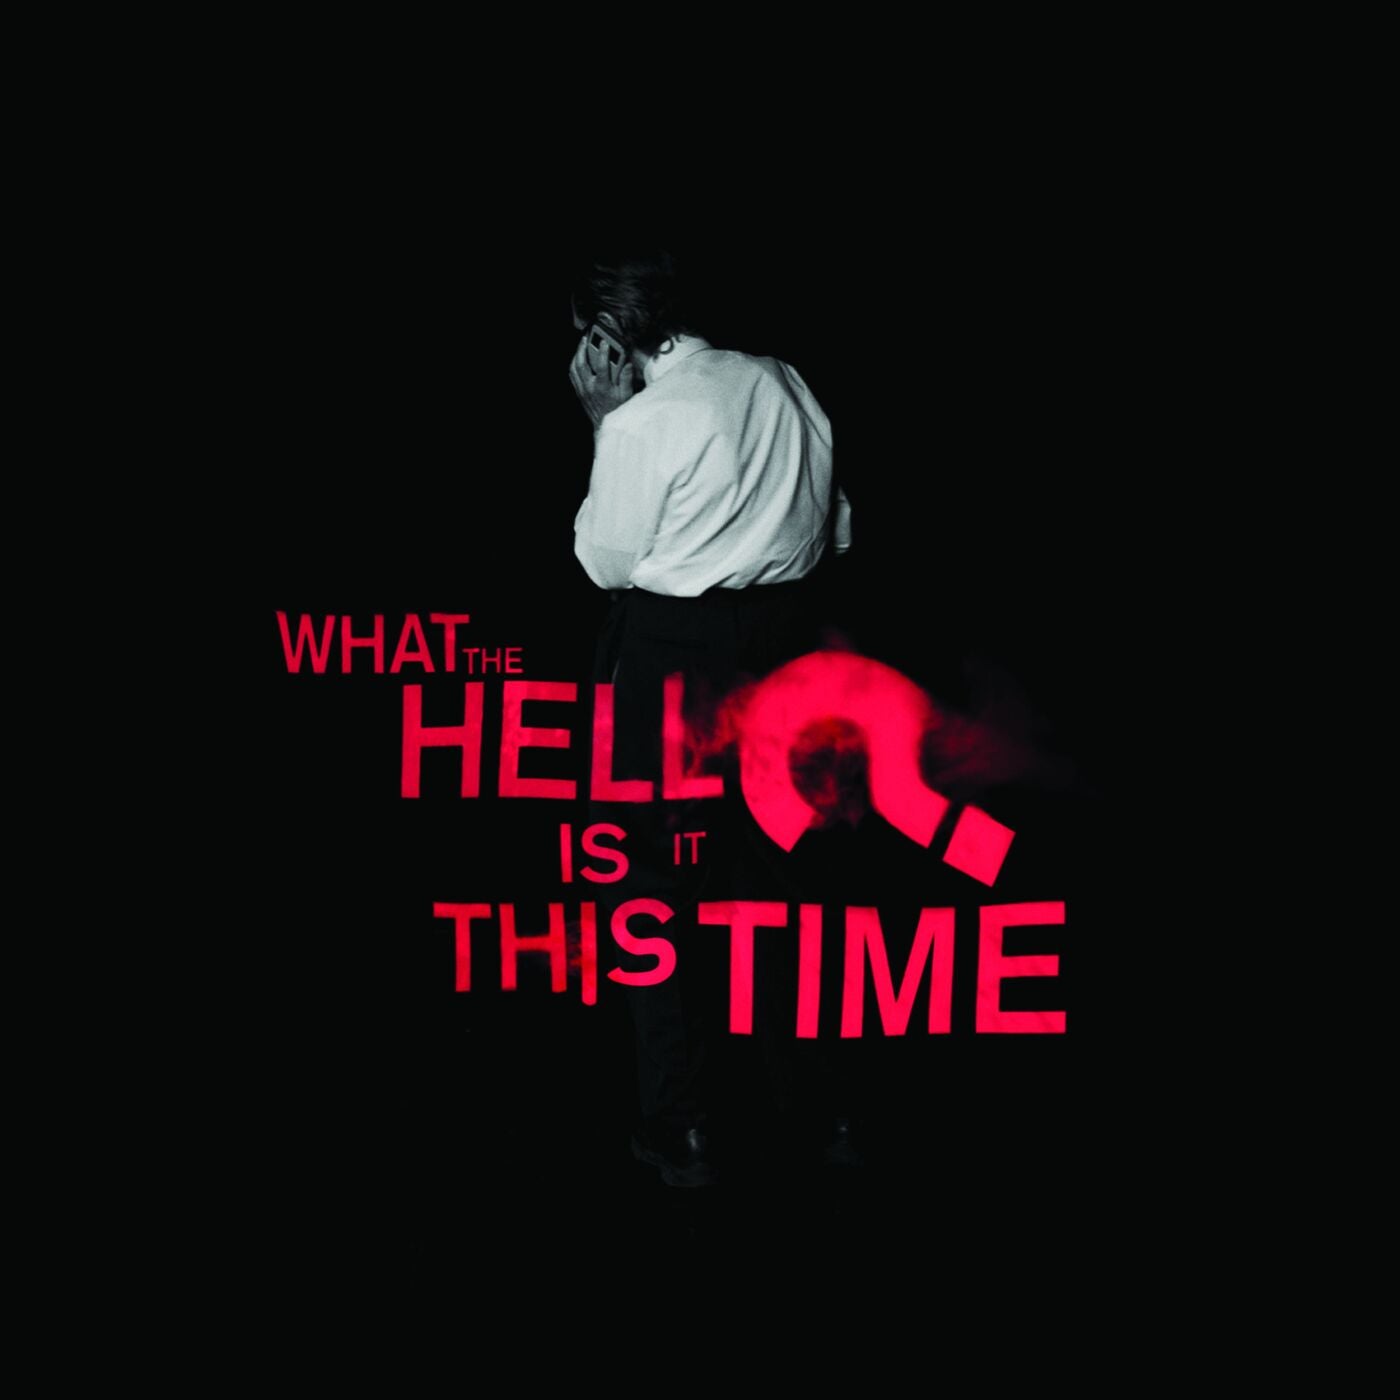 What in hell is bad. What the Hell is it. Hell time. Альбом what the Hell. Sparks - what the Hell is it this time (Live in London 2018).